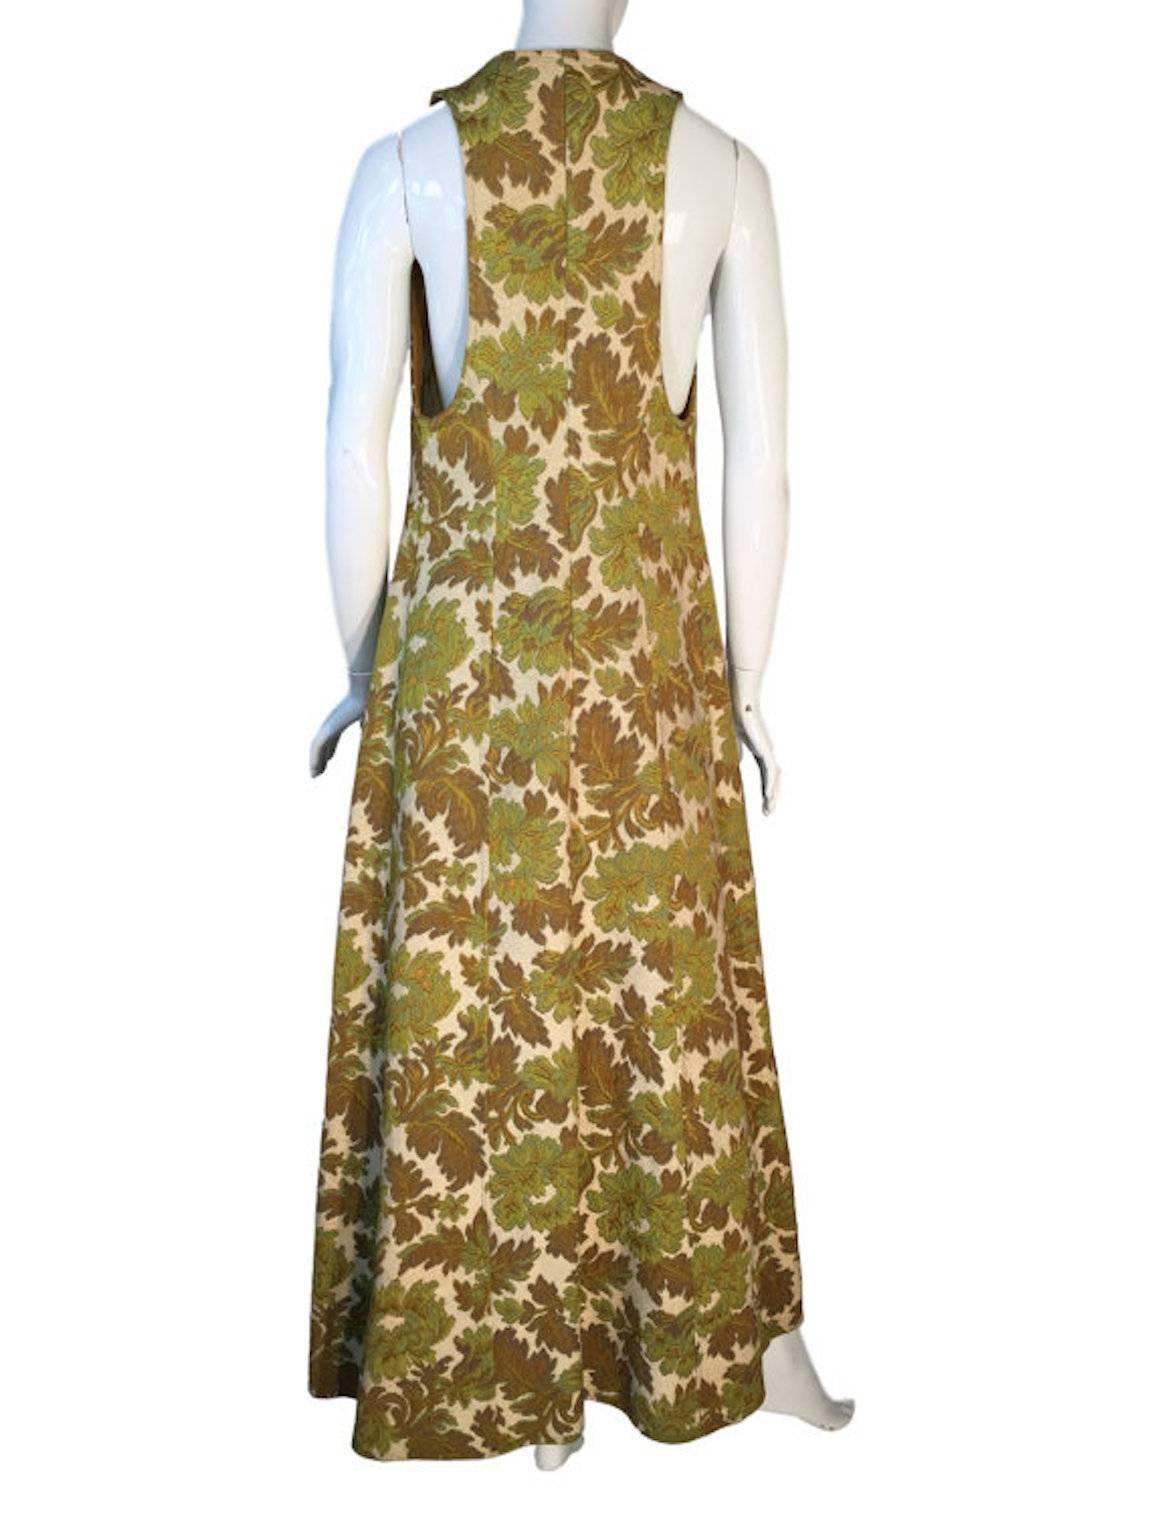 Biba late 1960s tapestry full length waistcoat, a piece worn by Barbara Hulanicki herself. Has open front/no fastenings.

Excellent condition.

Size UK 8 

Measuring 16 inches across bust and 57 inches length